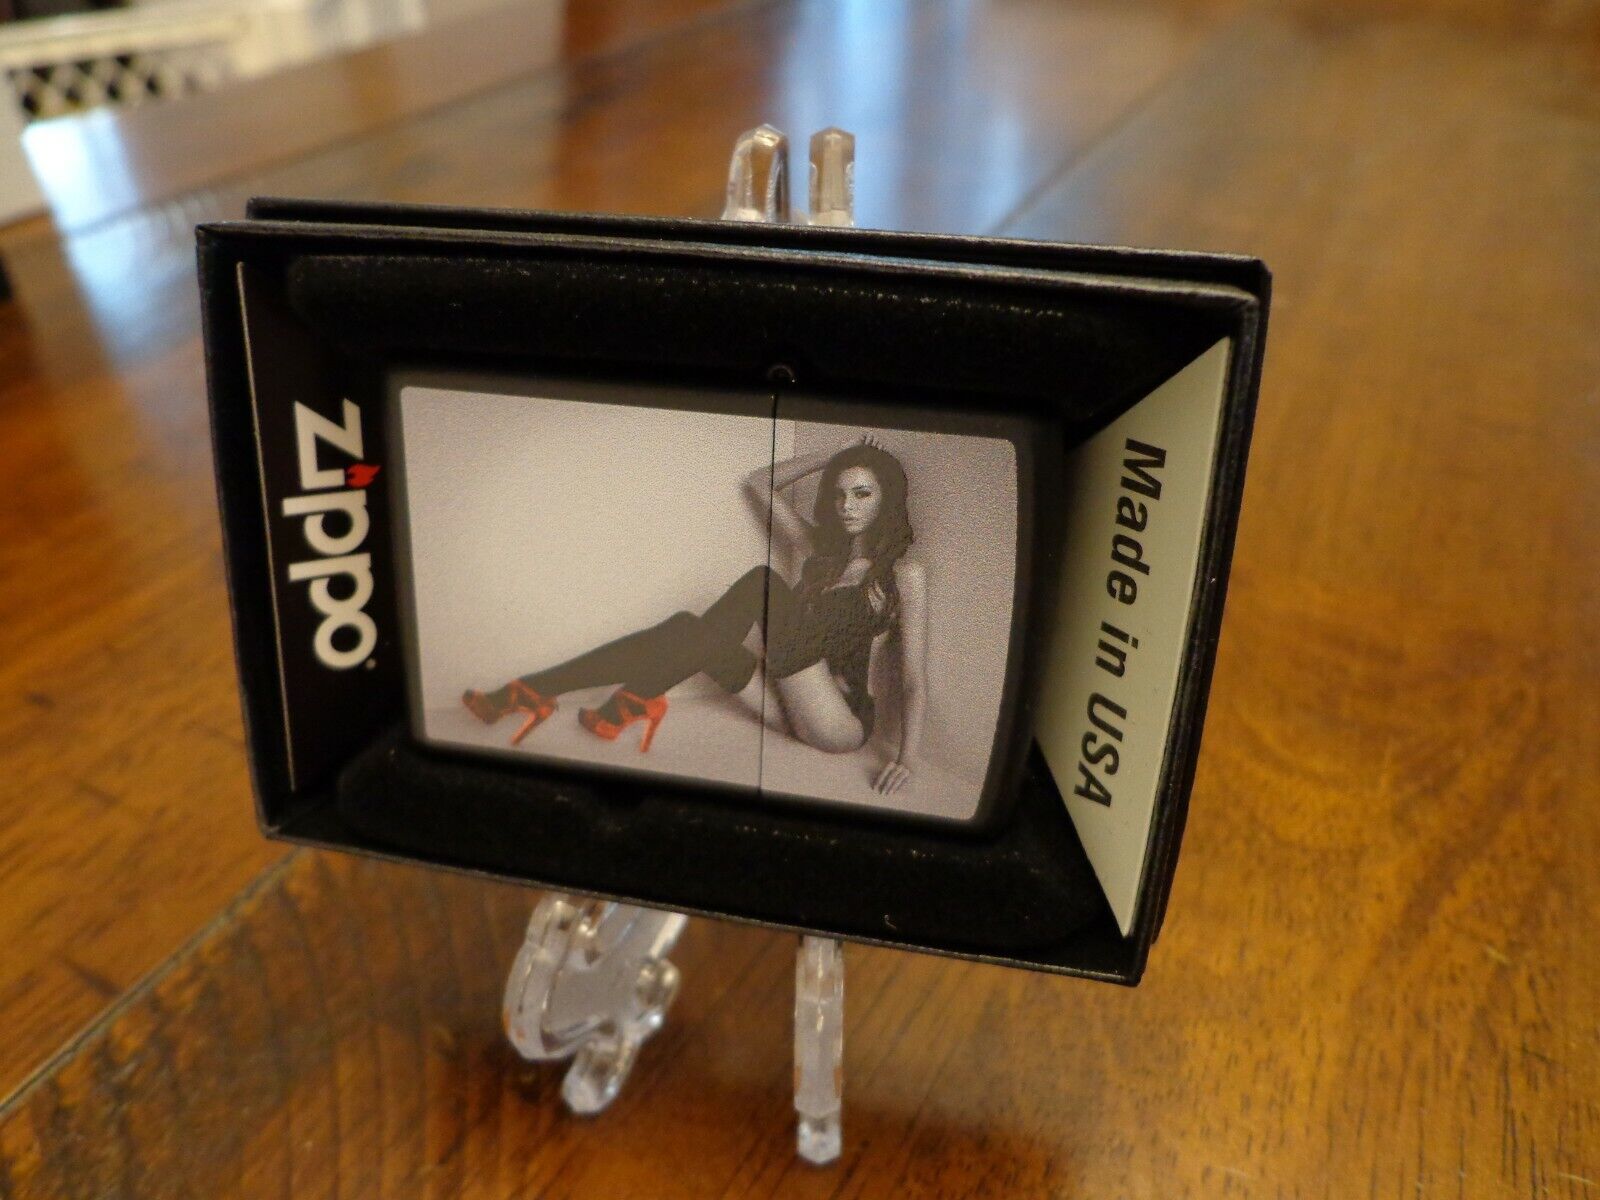 RED SHOE GIRL PINUP ZIPPO LIGHTER MINT IN BOX. Available Now for 29.95